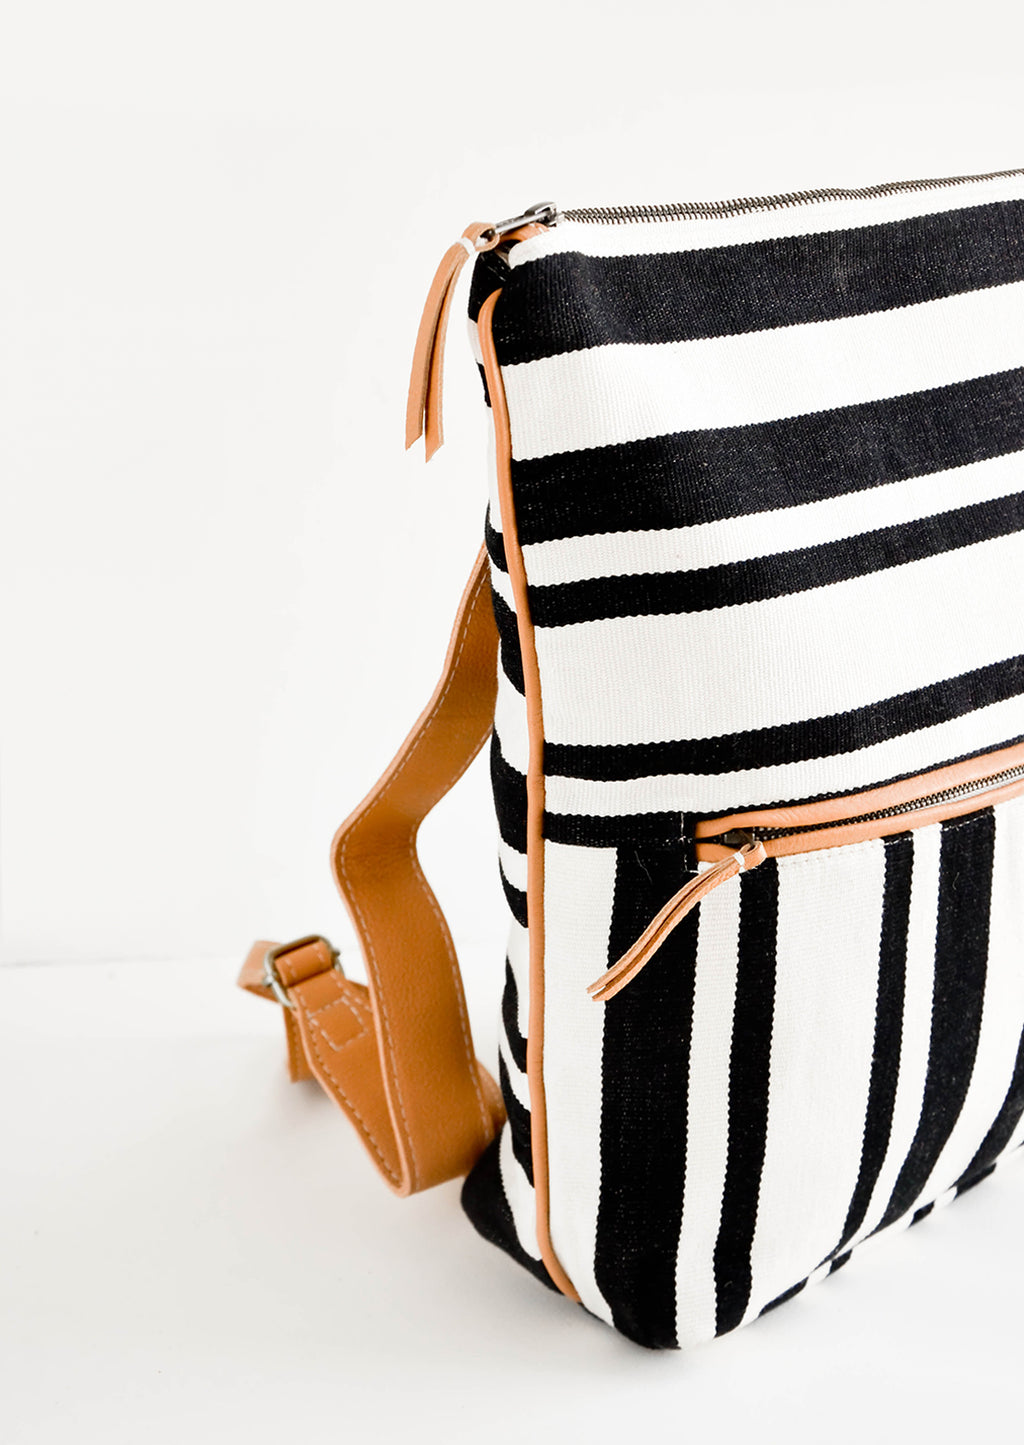 2: Fashion backpack in black and white striped cotton canvas with tan leather accents